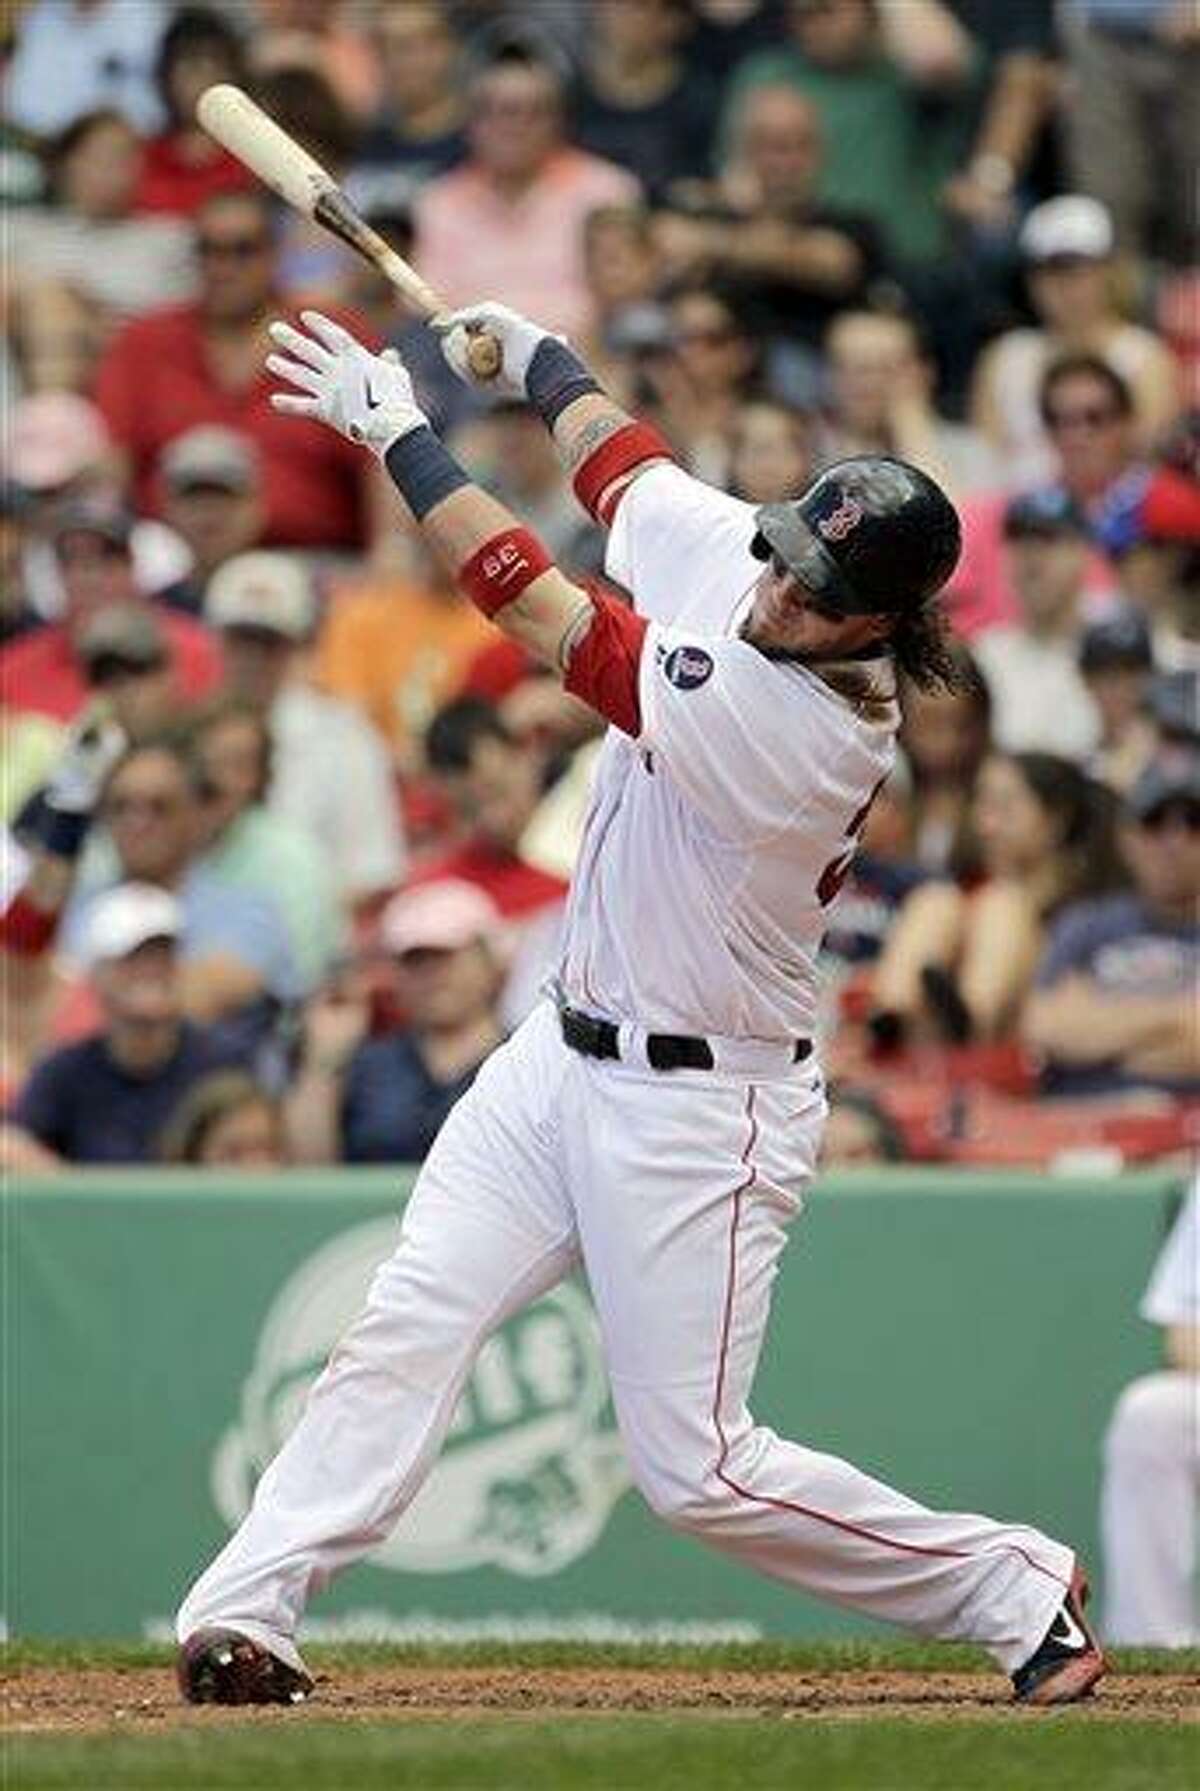 Boston Red Sox's Jarrod Saltalamacchia (39) follows through on a home run during the sixth inning of a baseball game against the Los Angeles Angels, Sunday, June 9, 2013, at Fenway Park in Boston. Saltalamacchia hit two home runs in the Red Sox 10-5 win. (AP Photo/Mary Schwalm)